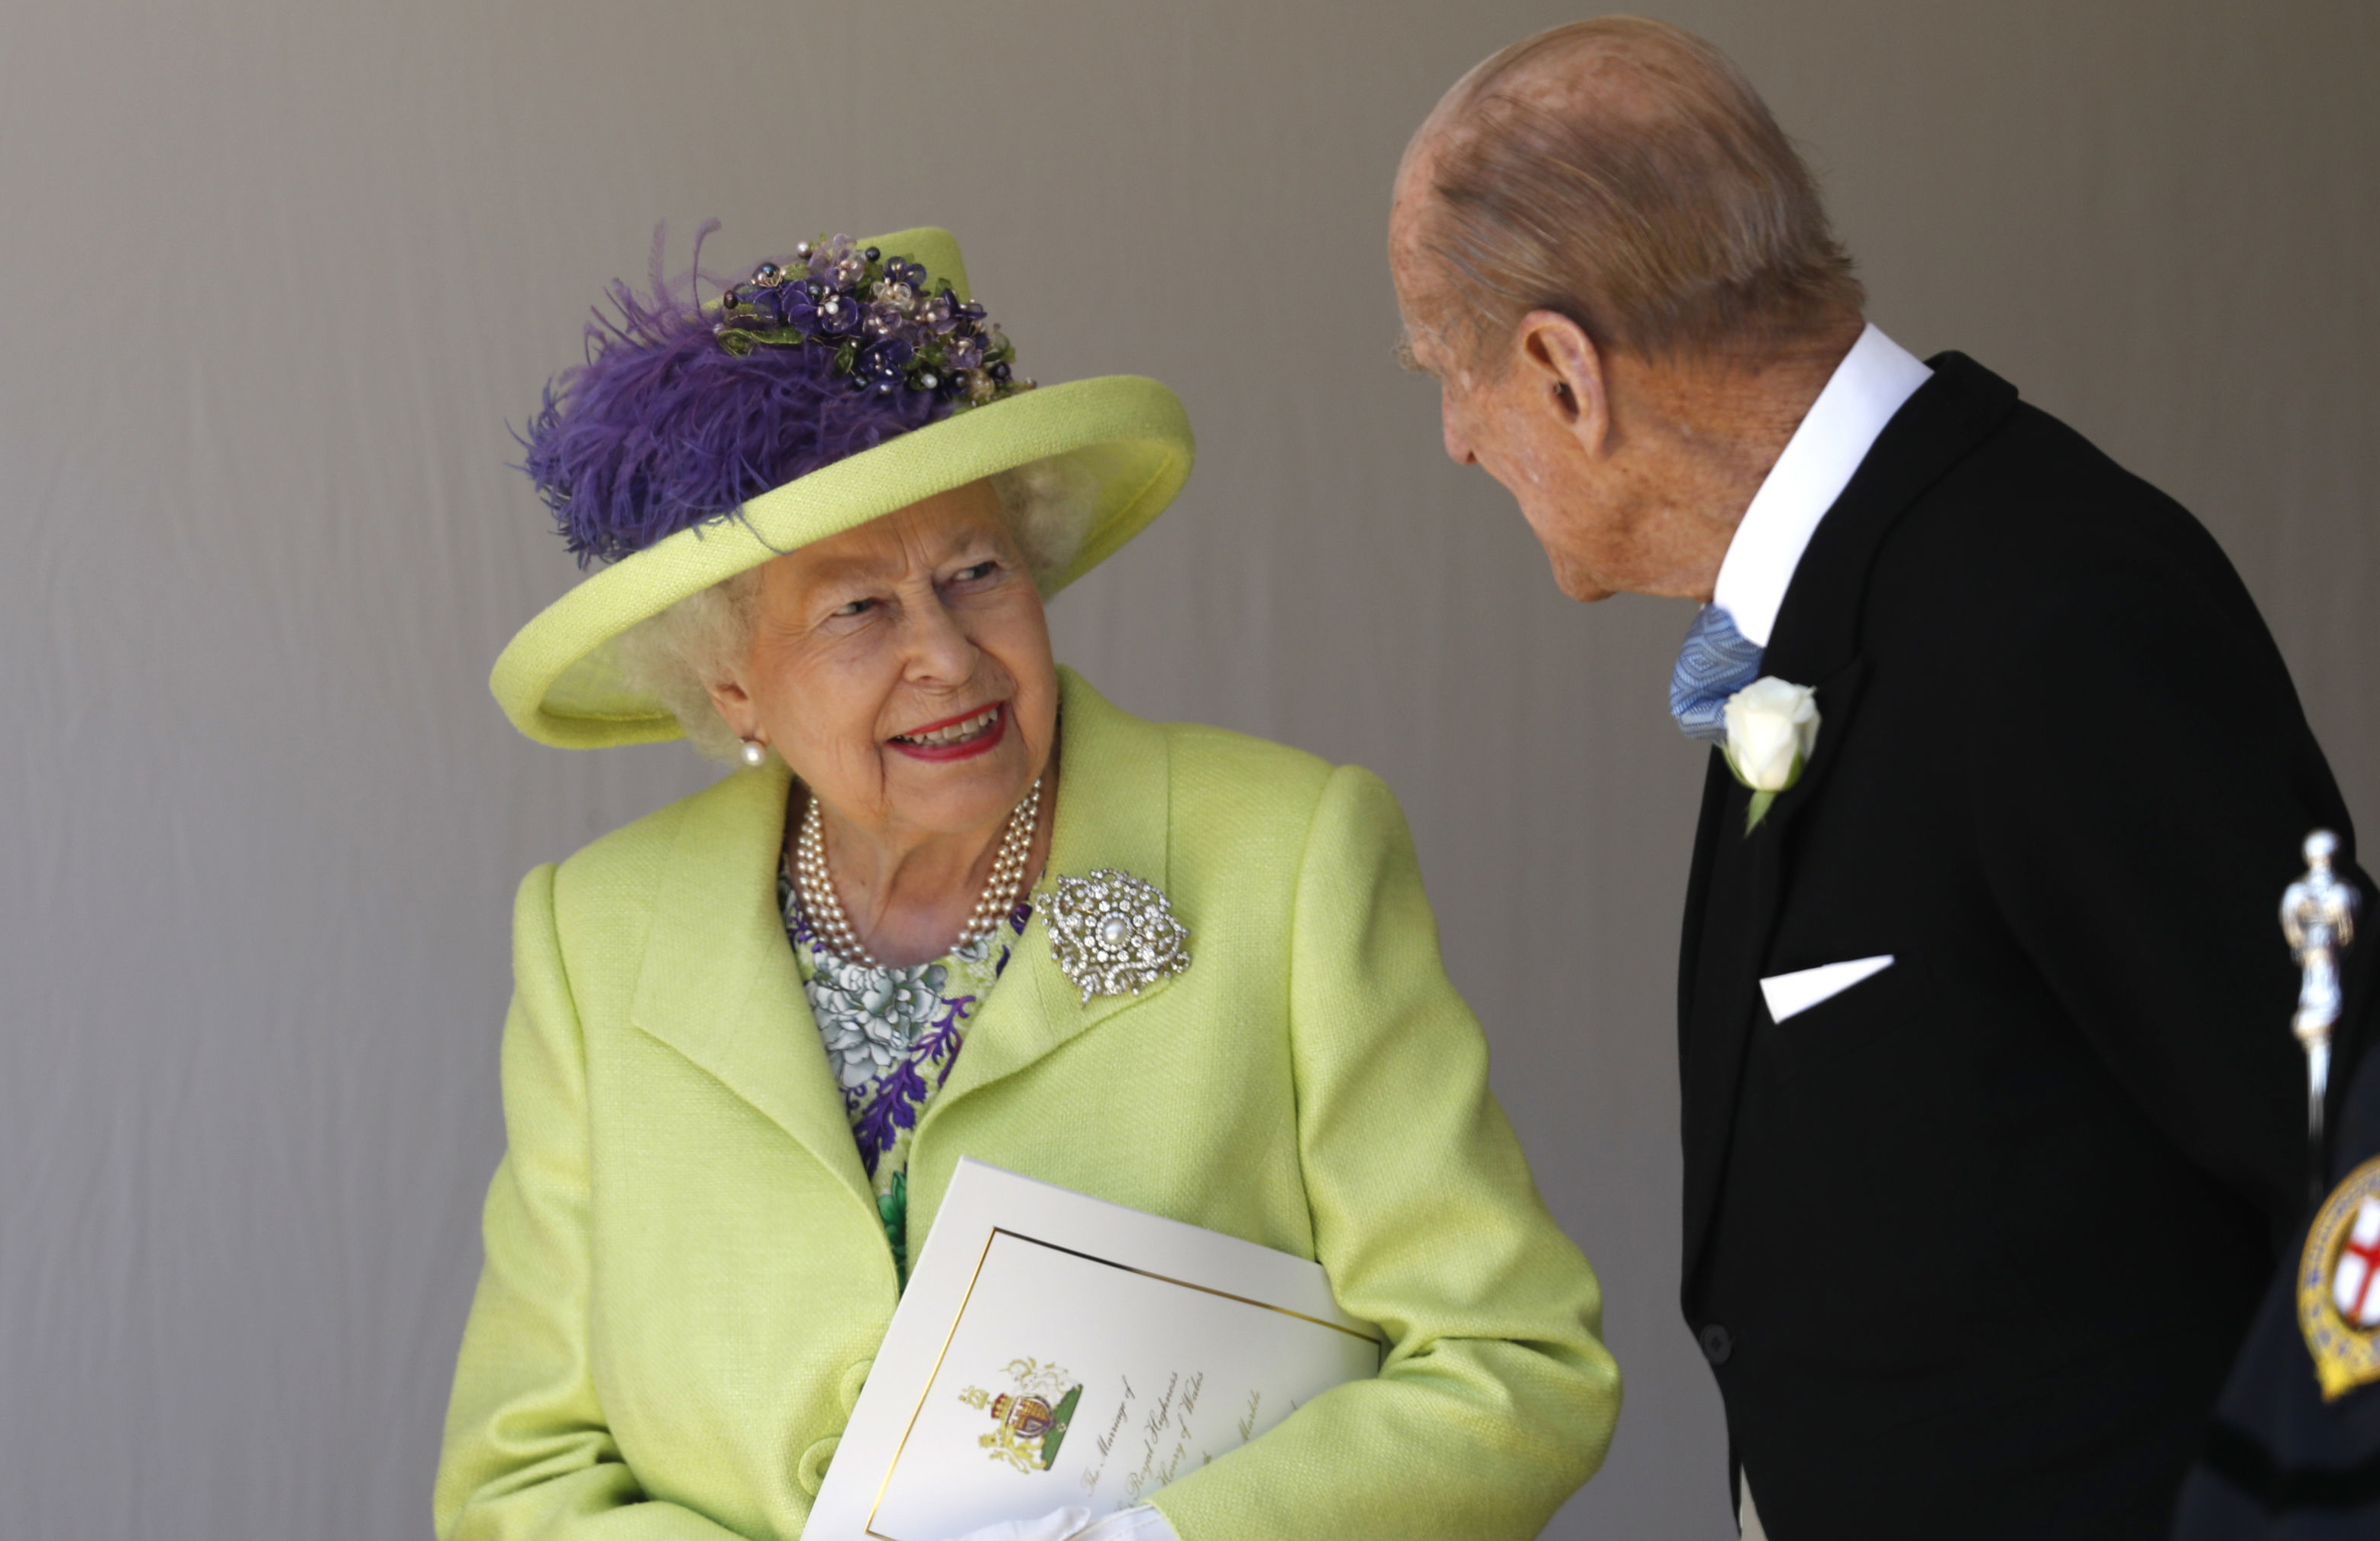 The Queen and other guests will have eaten out of bowls at the lunchtime recipe (Alastair Grant/PA)